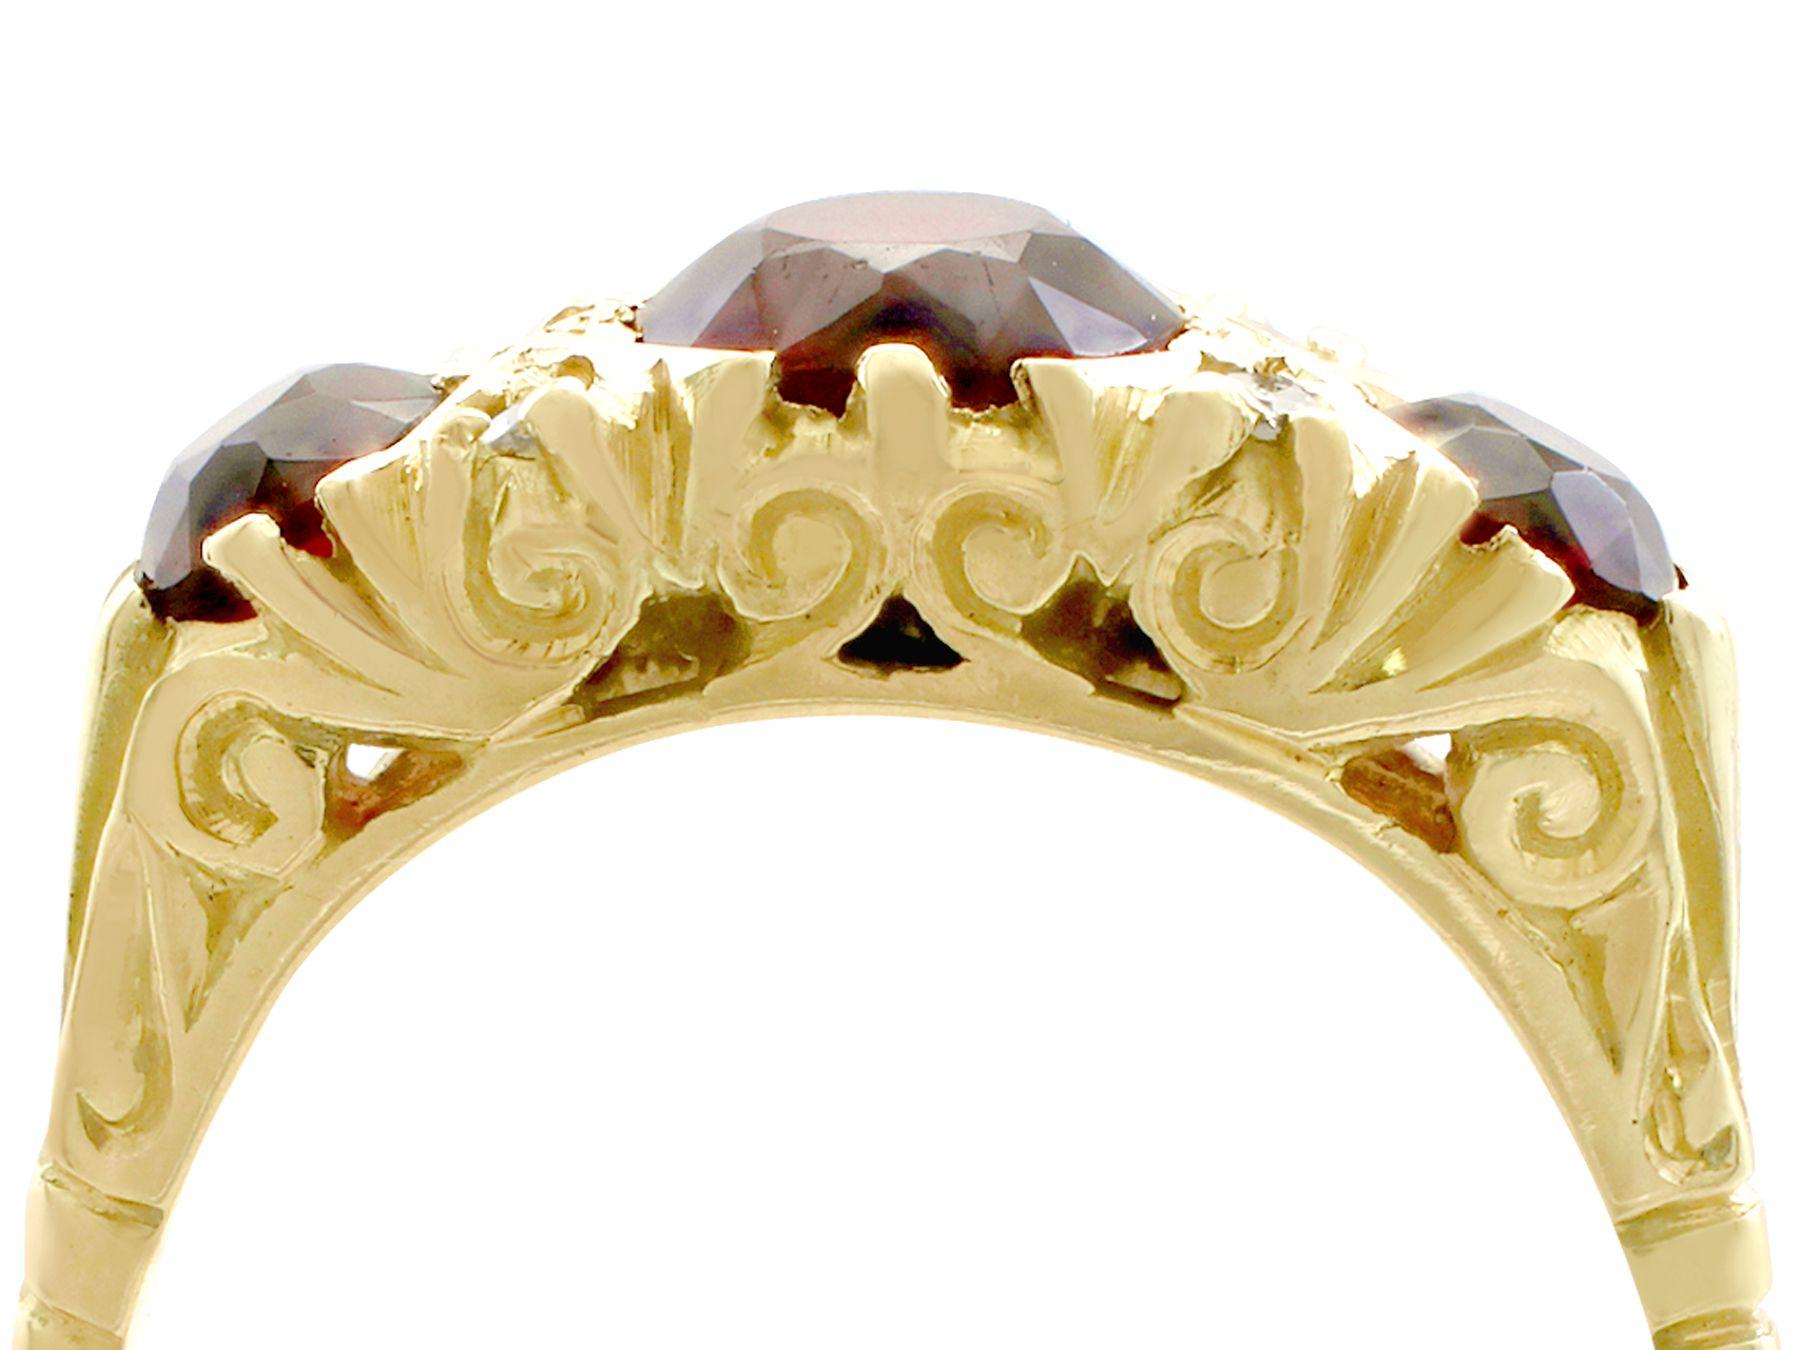 A fine and impressive 2.05 carat garnet and 0.08 carat diamond, 18 karat yellow gold dress ring; part of our diverse vintage jewelry collections.

This fine and impressive vintage garnet and diamond ring has been crafted in 18k yellow gold.

The